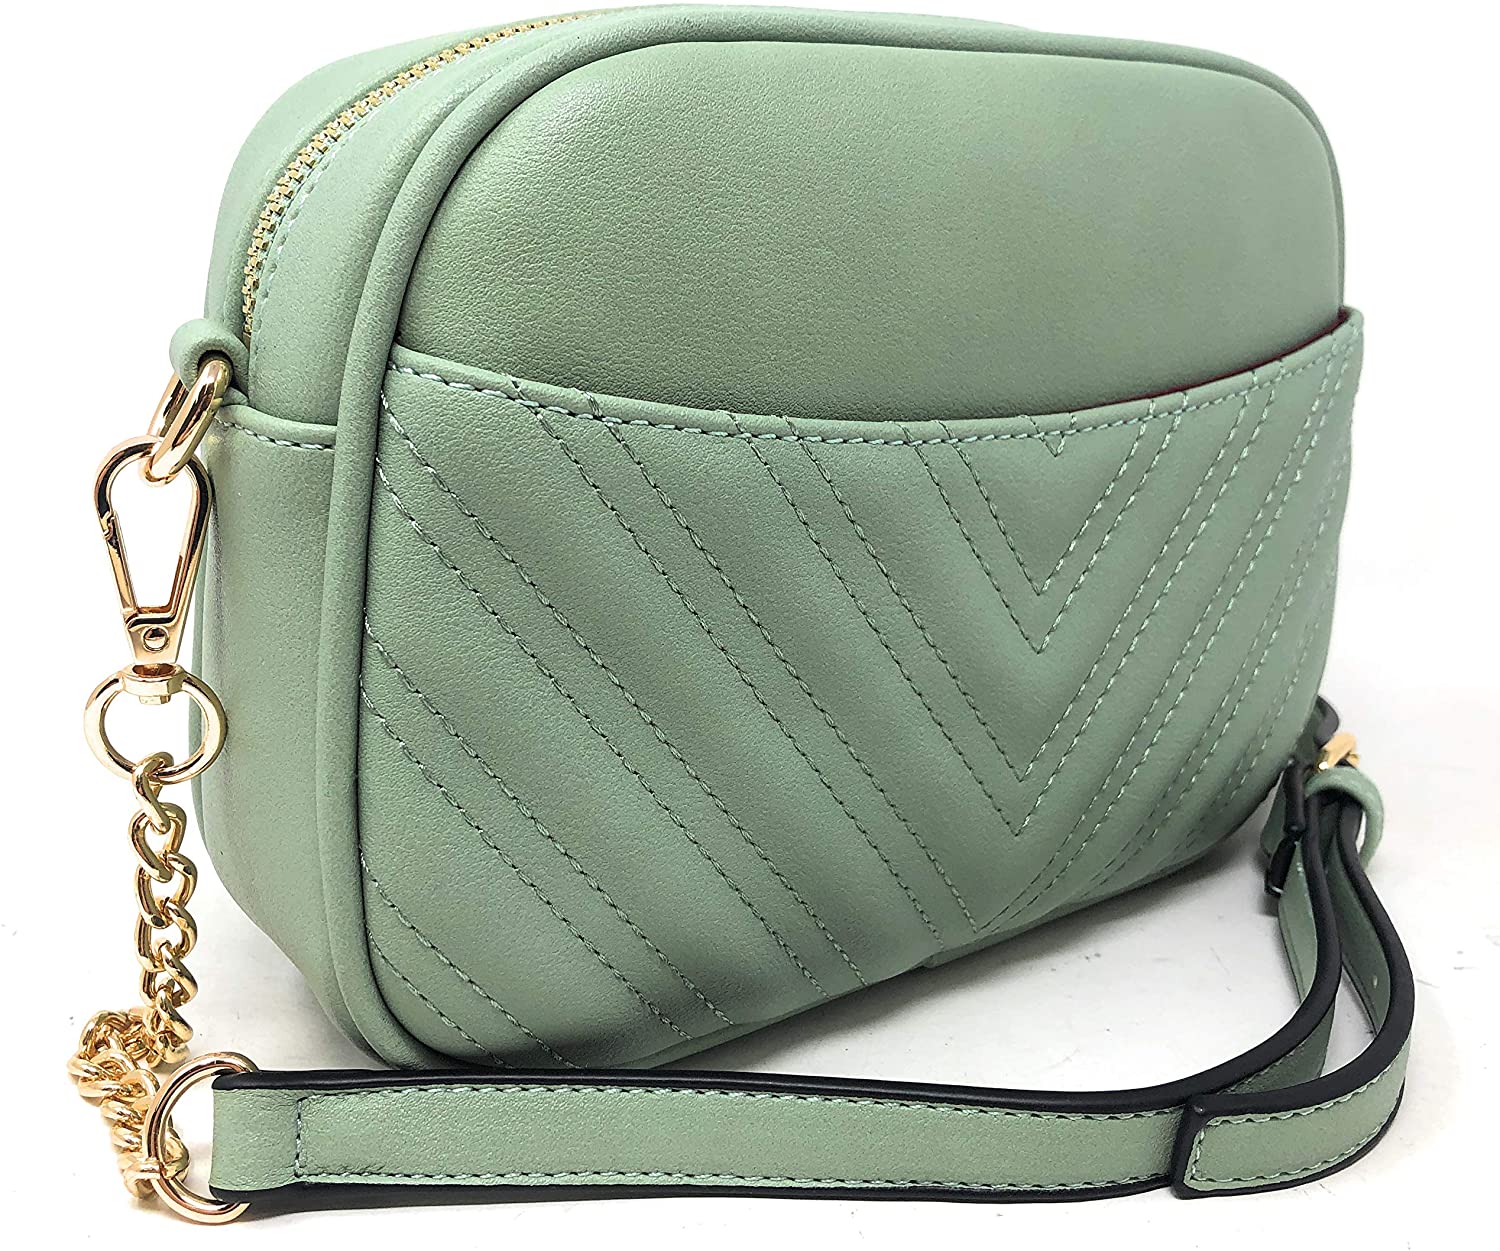 lola mae Crossbody Bags for Women Fashion Quilted Shoulder purse with  Convertible Chain Strap Classic Satchel Handbag